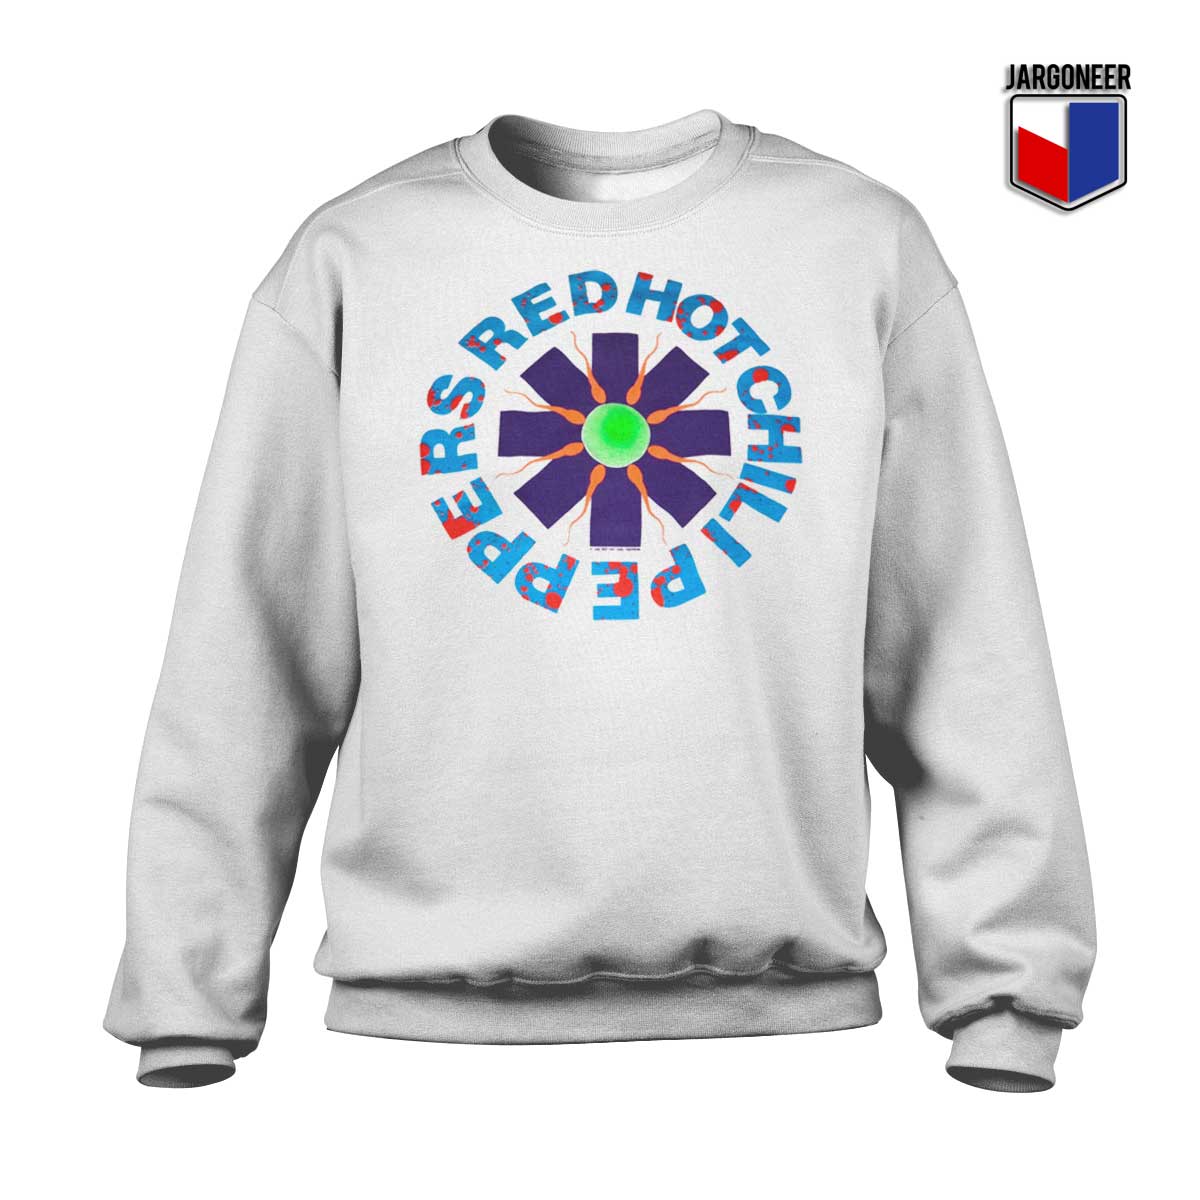 Chili Red Check Peppers Sweatshirt hot Now